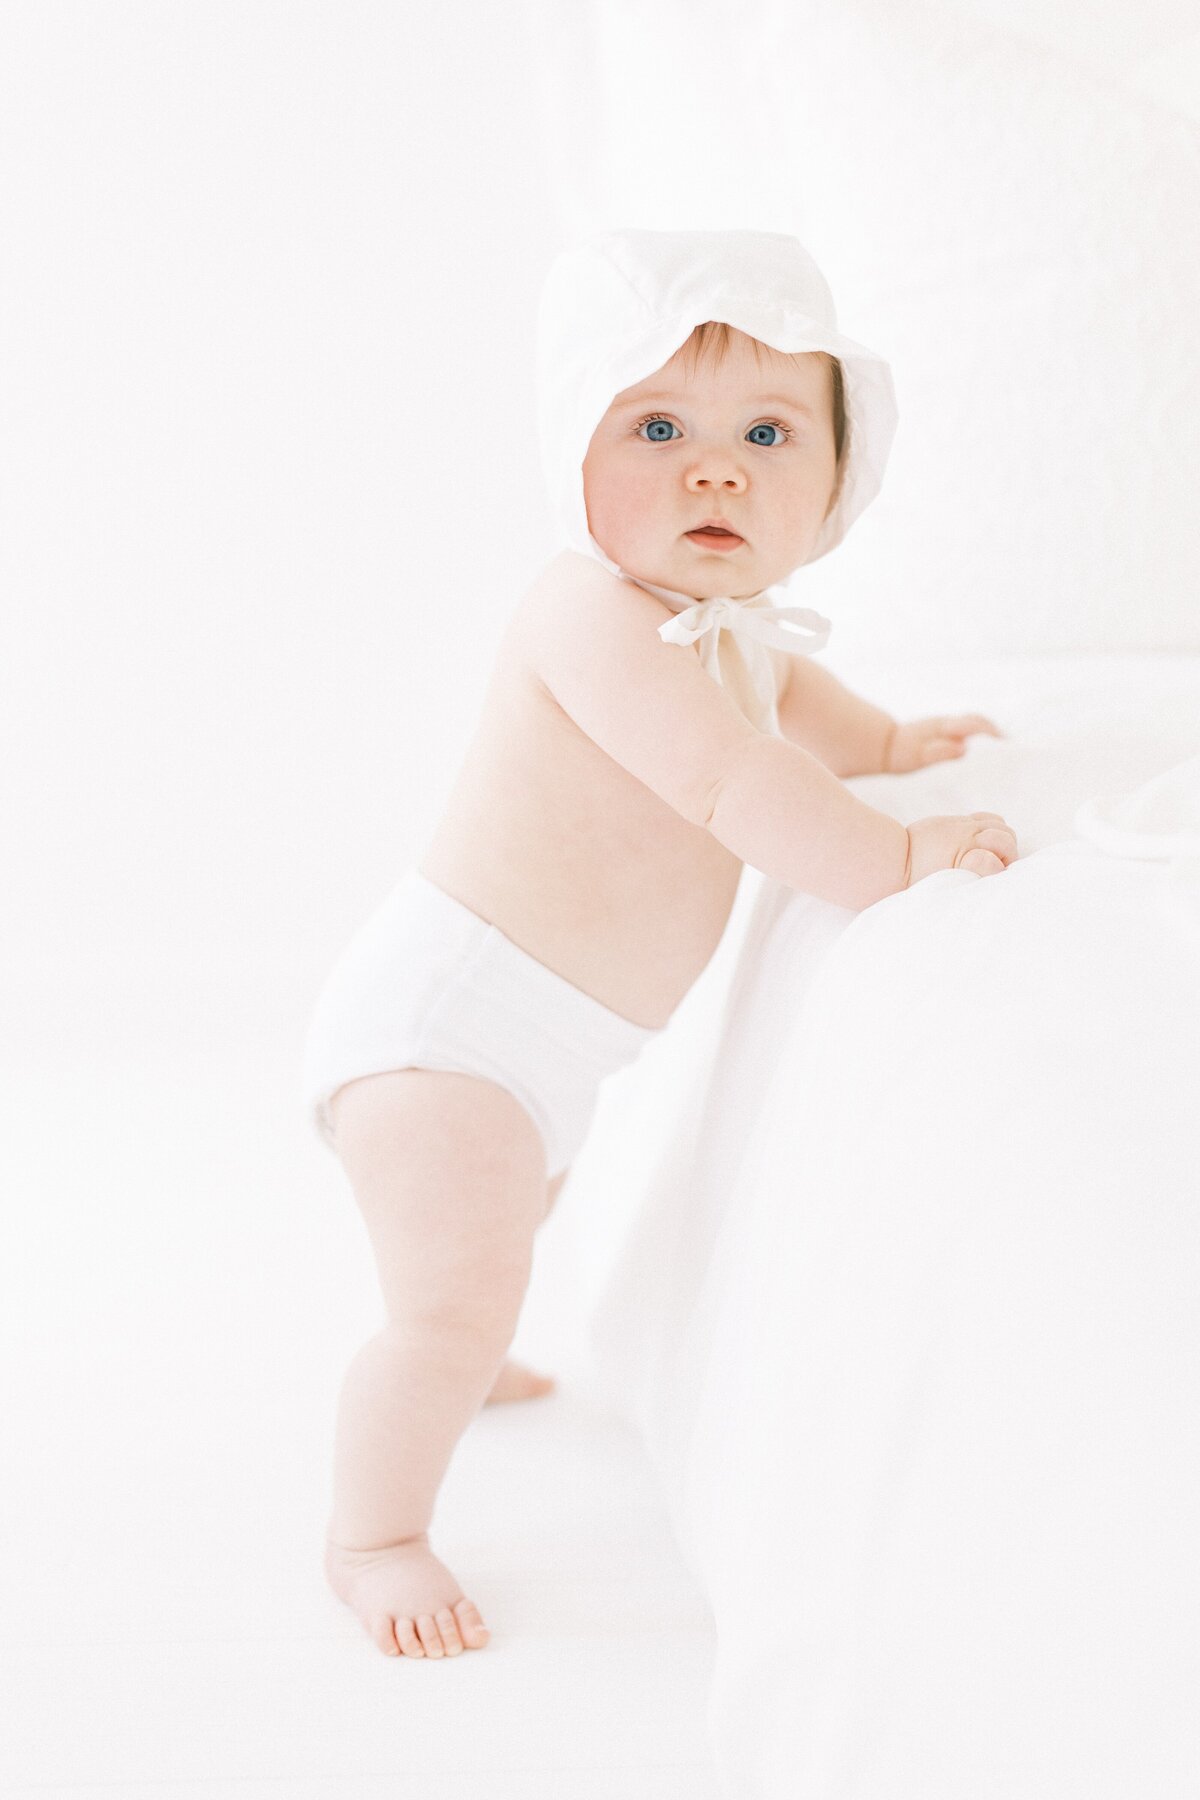 6 month old baby girl wearing a white bonnet standing and looking at camera during baby studio session